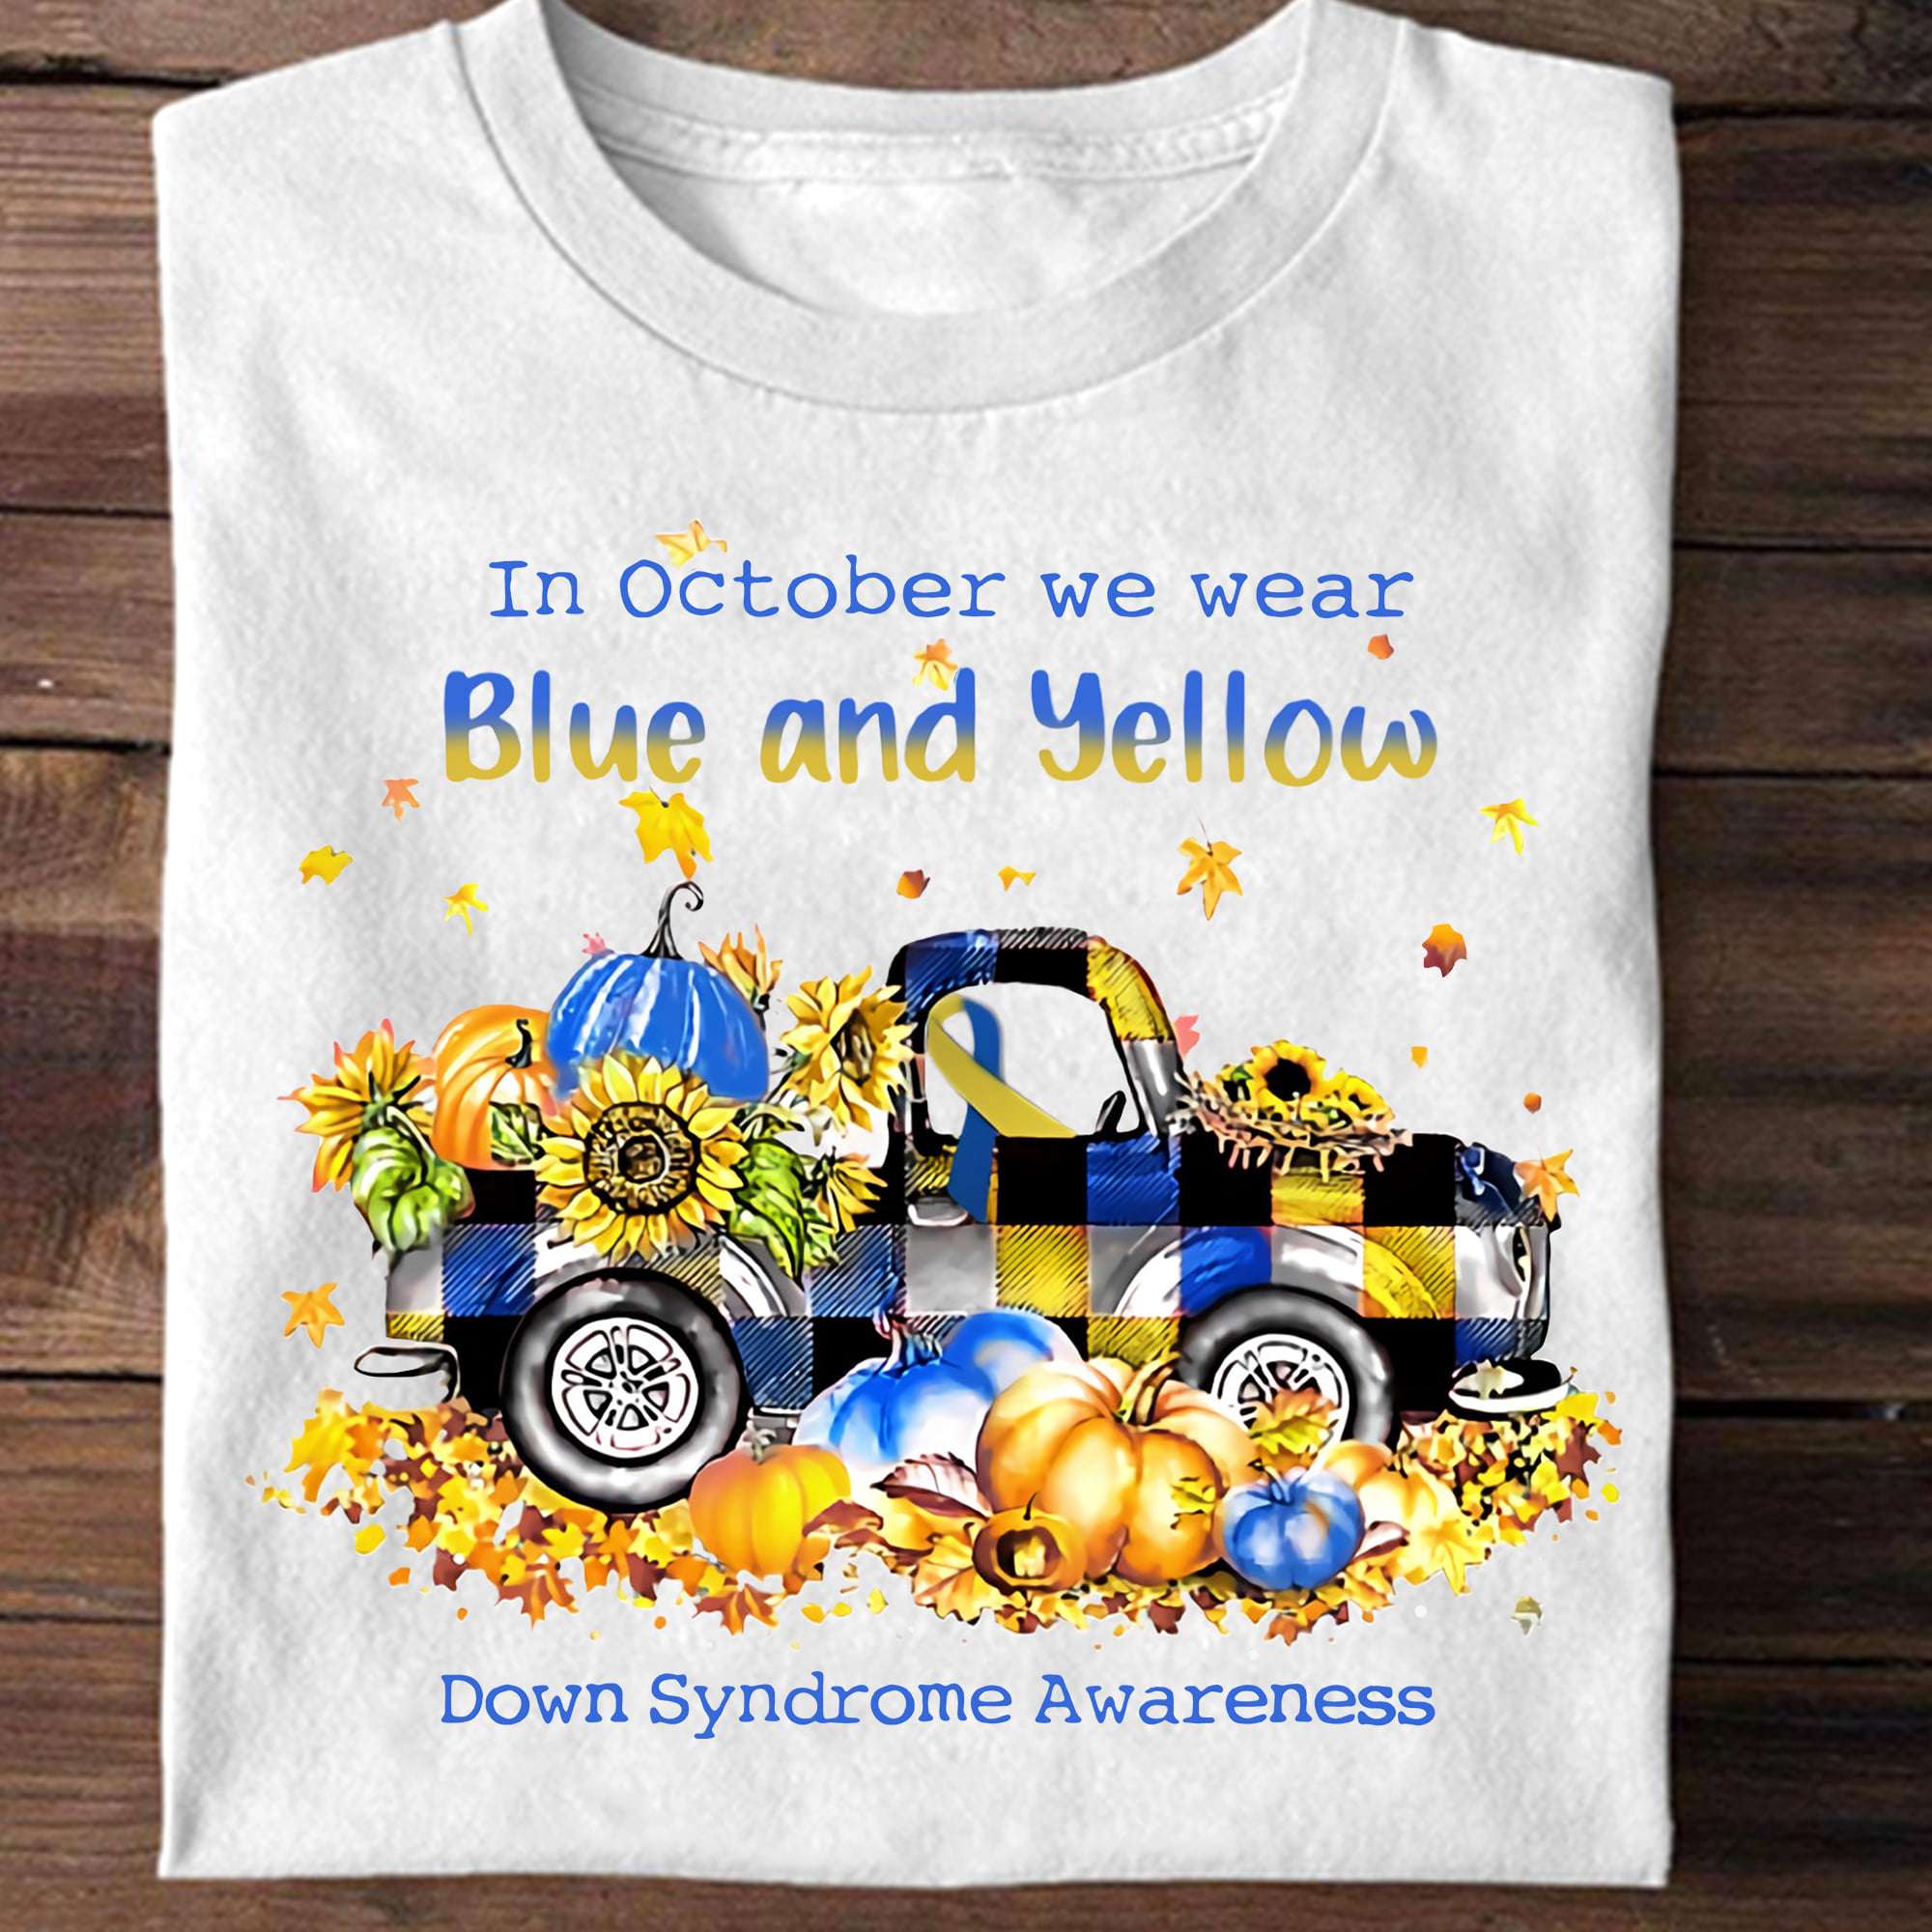 In October we wear Blue and Yellow - Down Syndrome Awareness, Pumpkin on truck